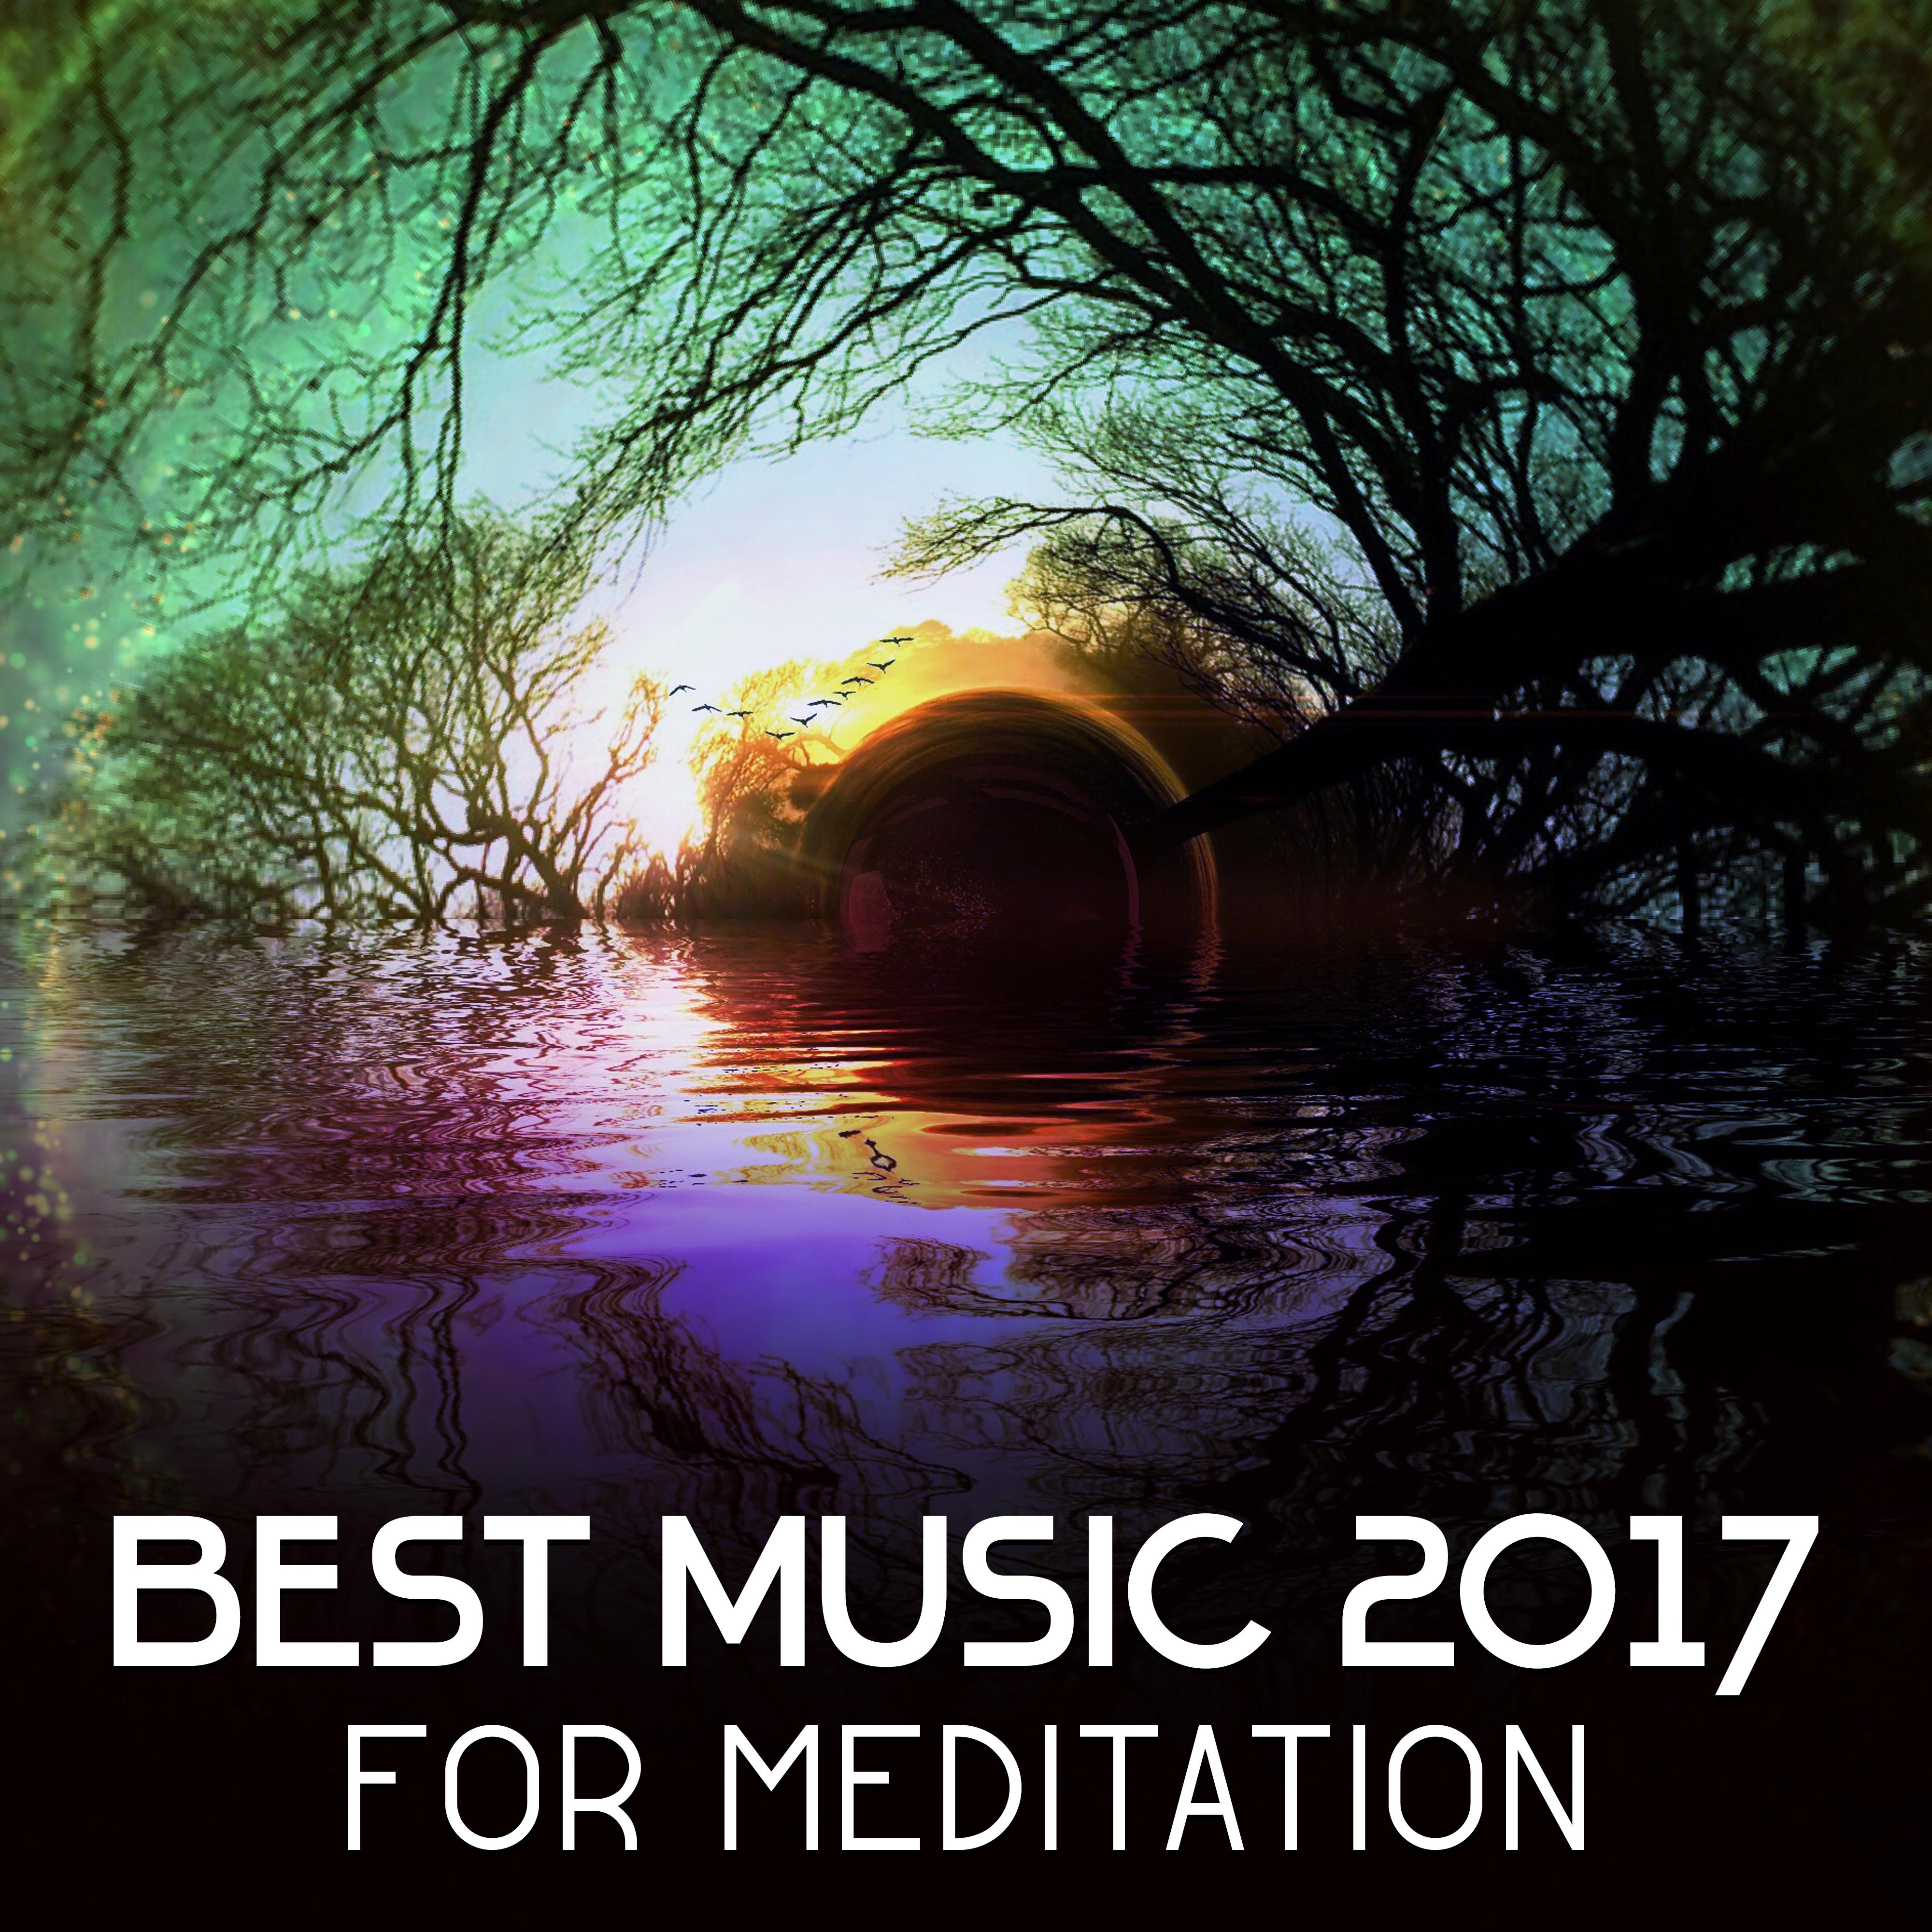 Best Music 2017 for Meditation  Calm Mantra, Pure Mind, Yoga Sounds, Meditation Music, Stress Free, Nature Sounds, Relaxation